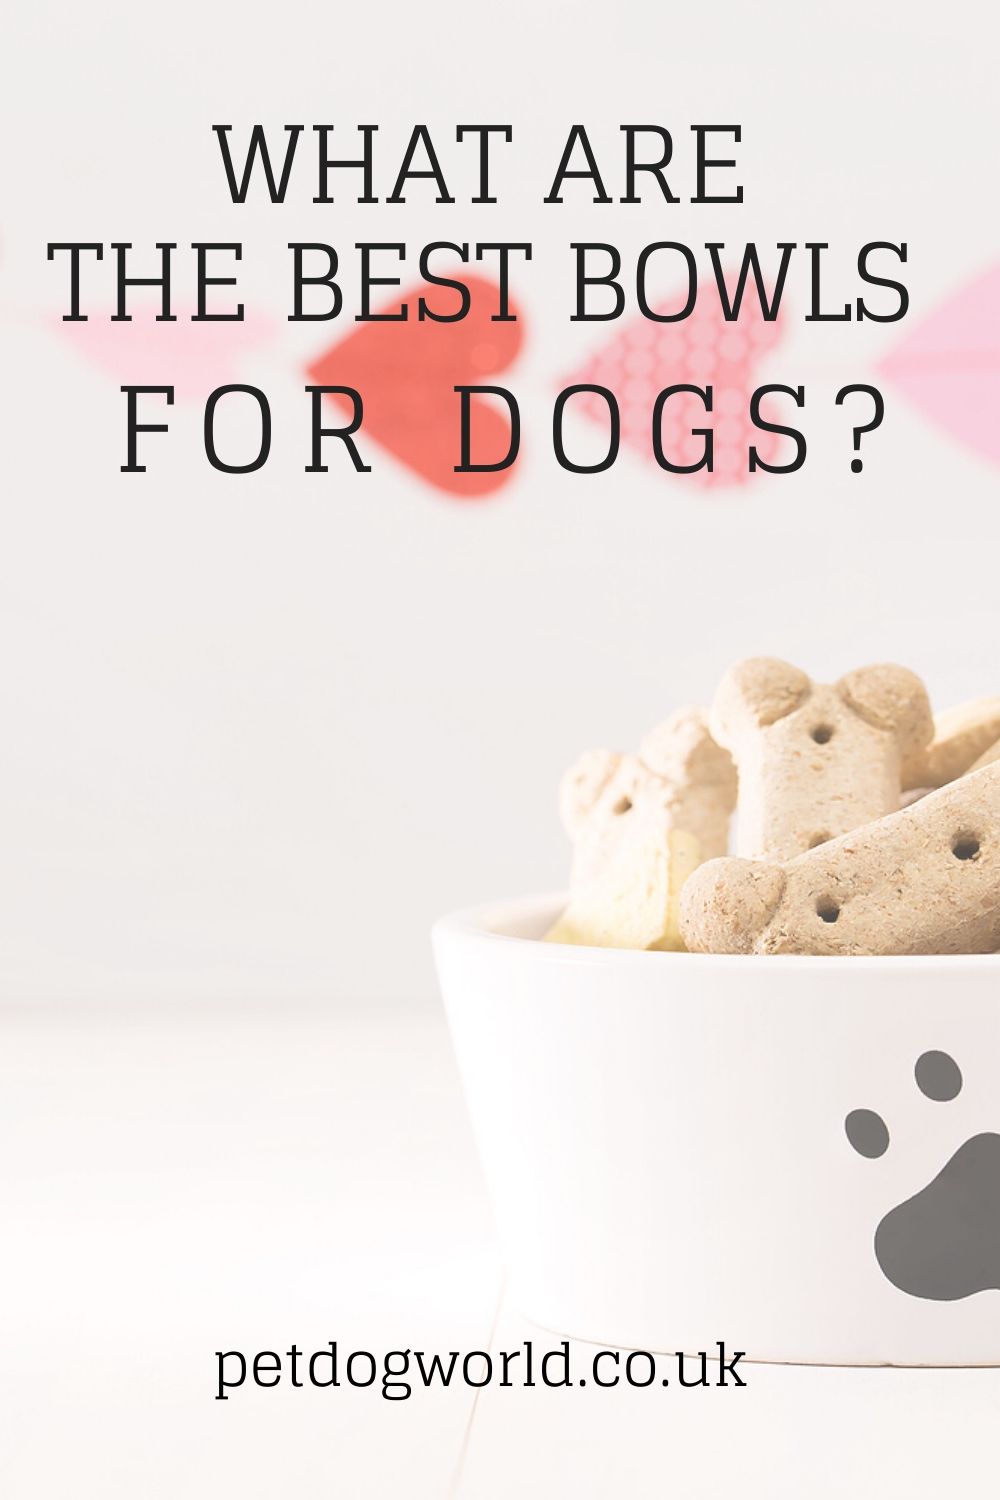 What dog bowls are the best?